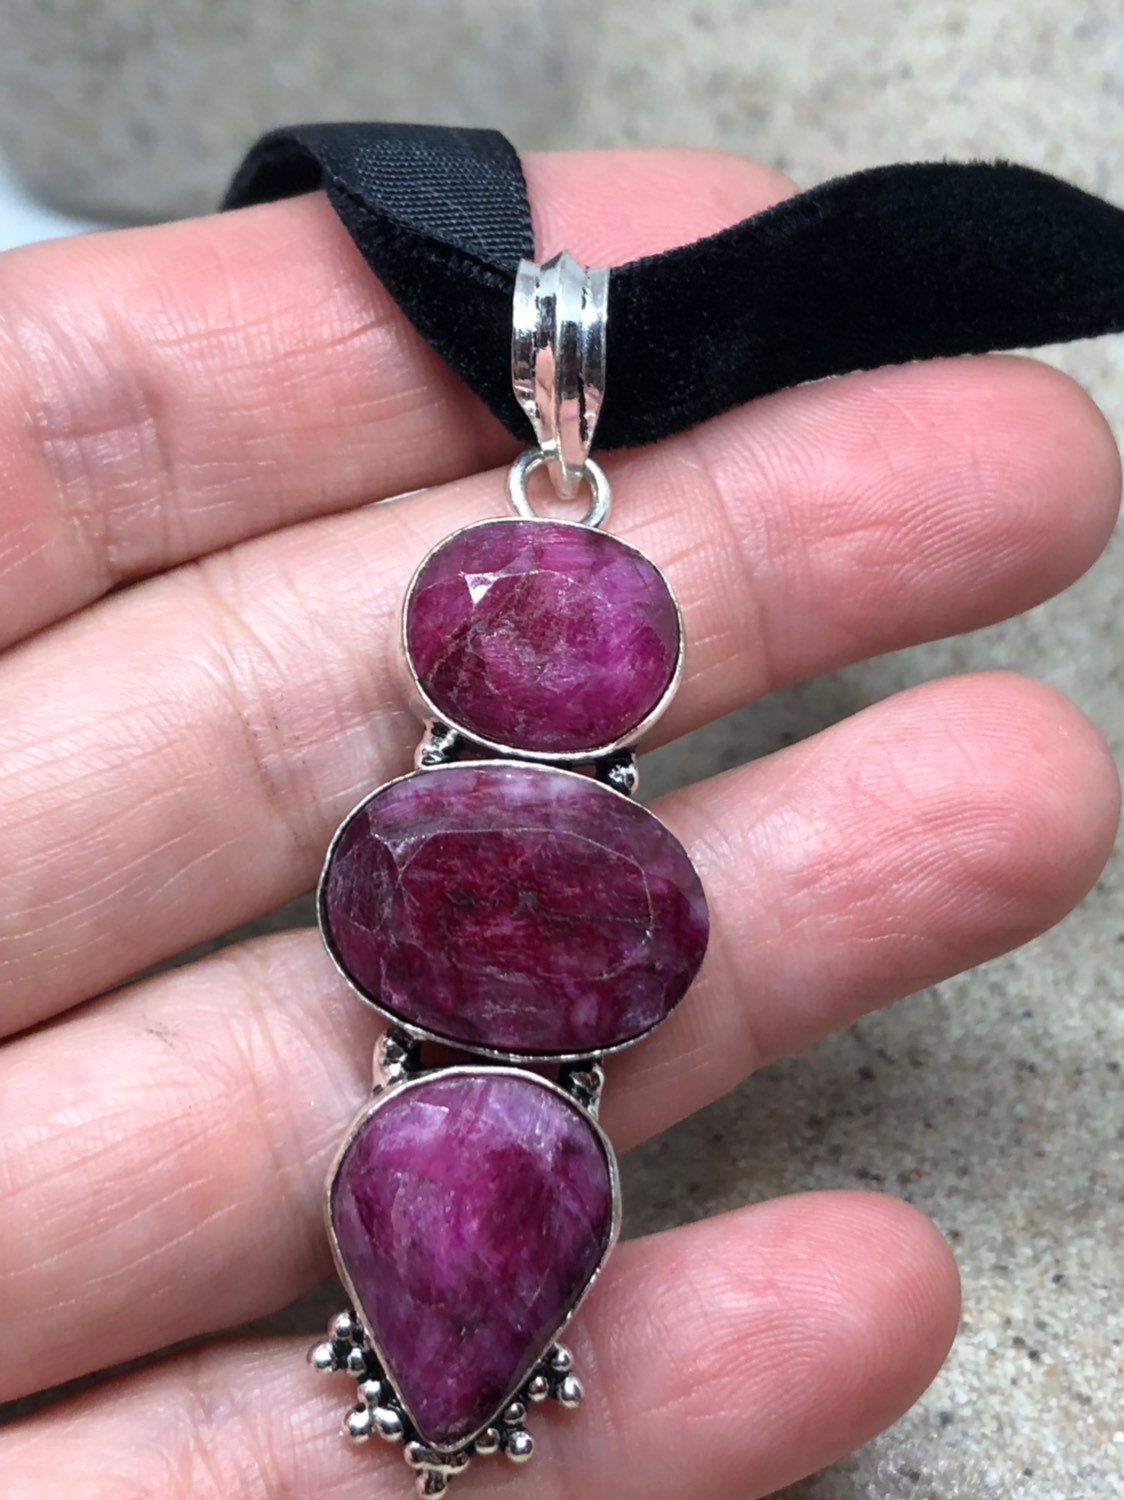 Vintage Pink Raw Ruby Choker Pendant Necklace